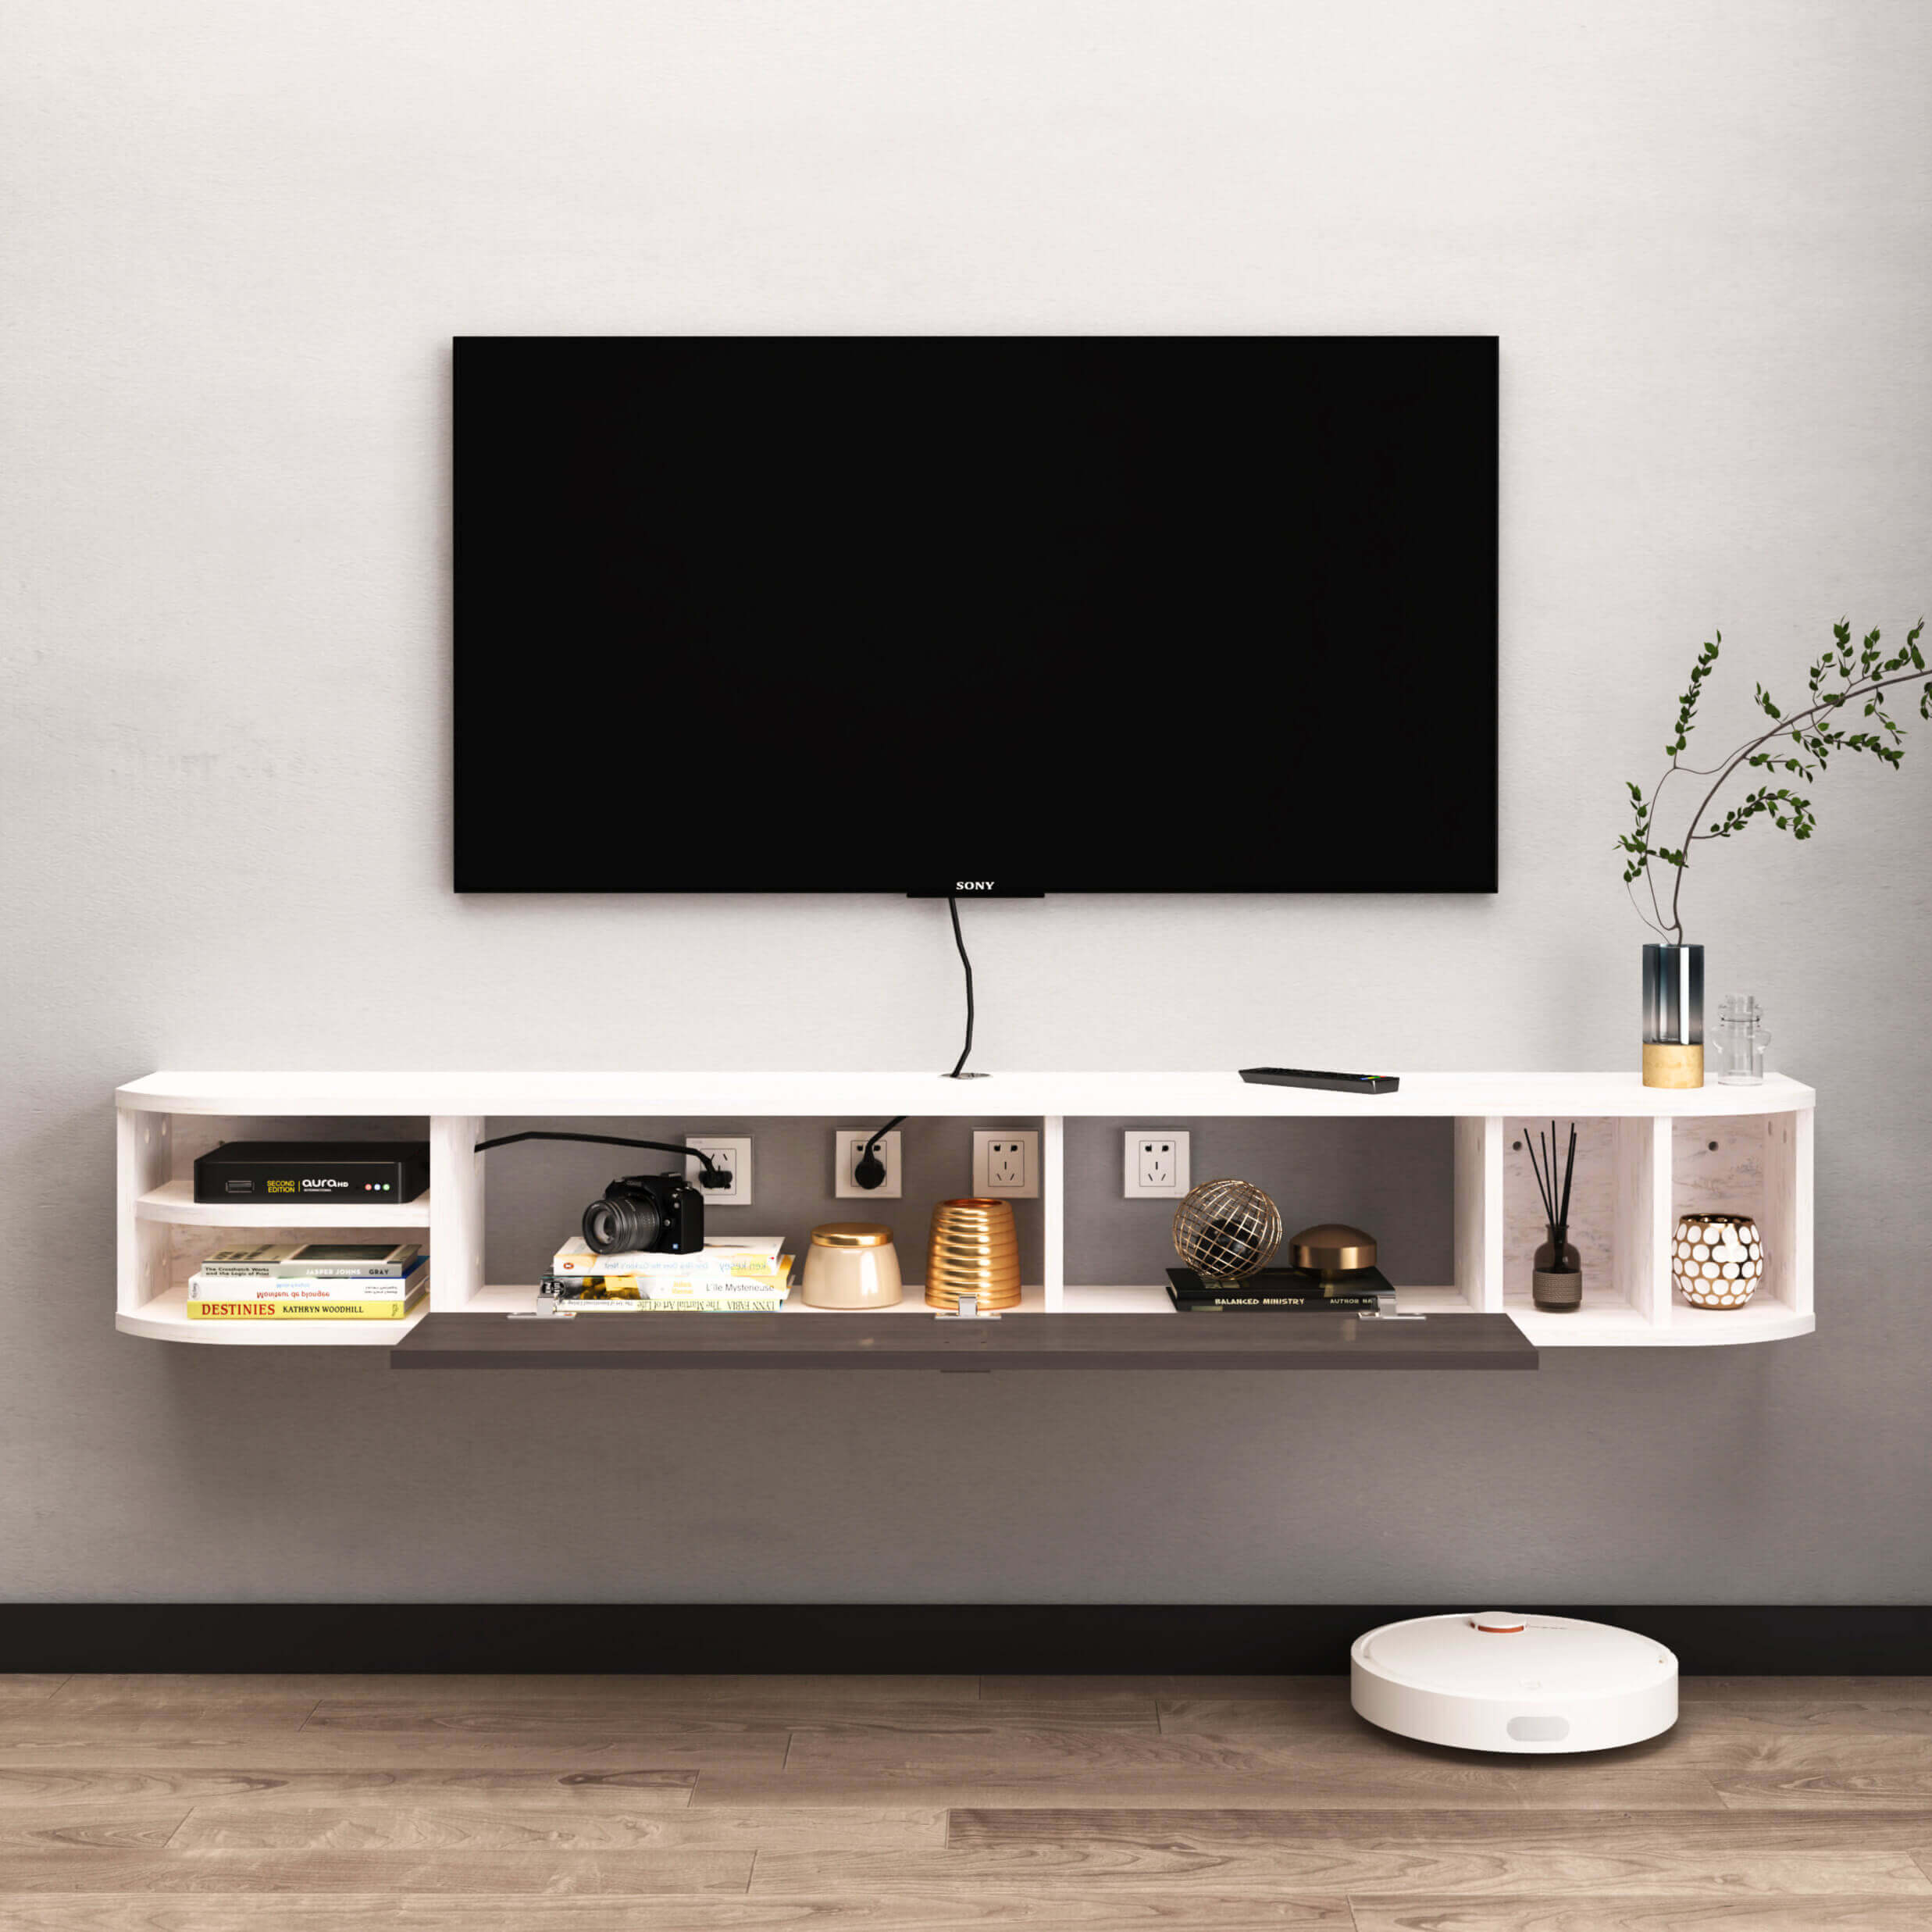 Off White Plywood Floating TV Stand with Storage Cubbies for 55" 60" Television